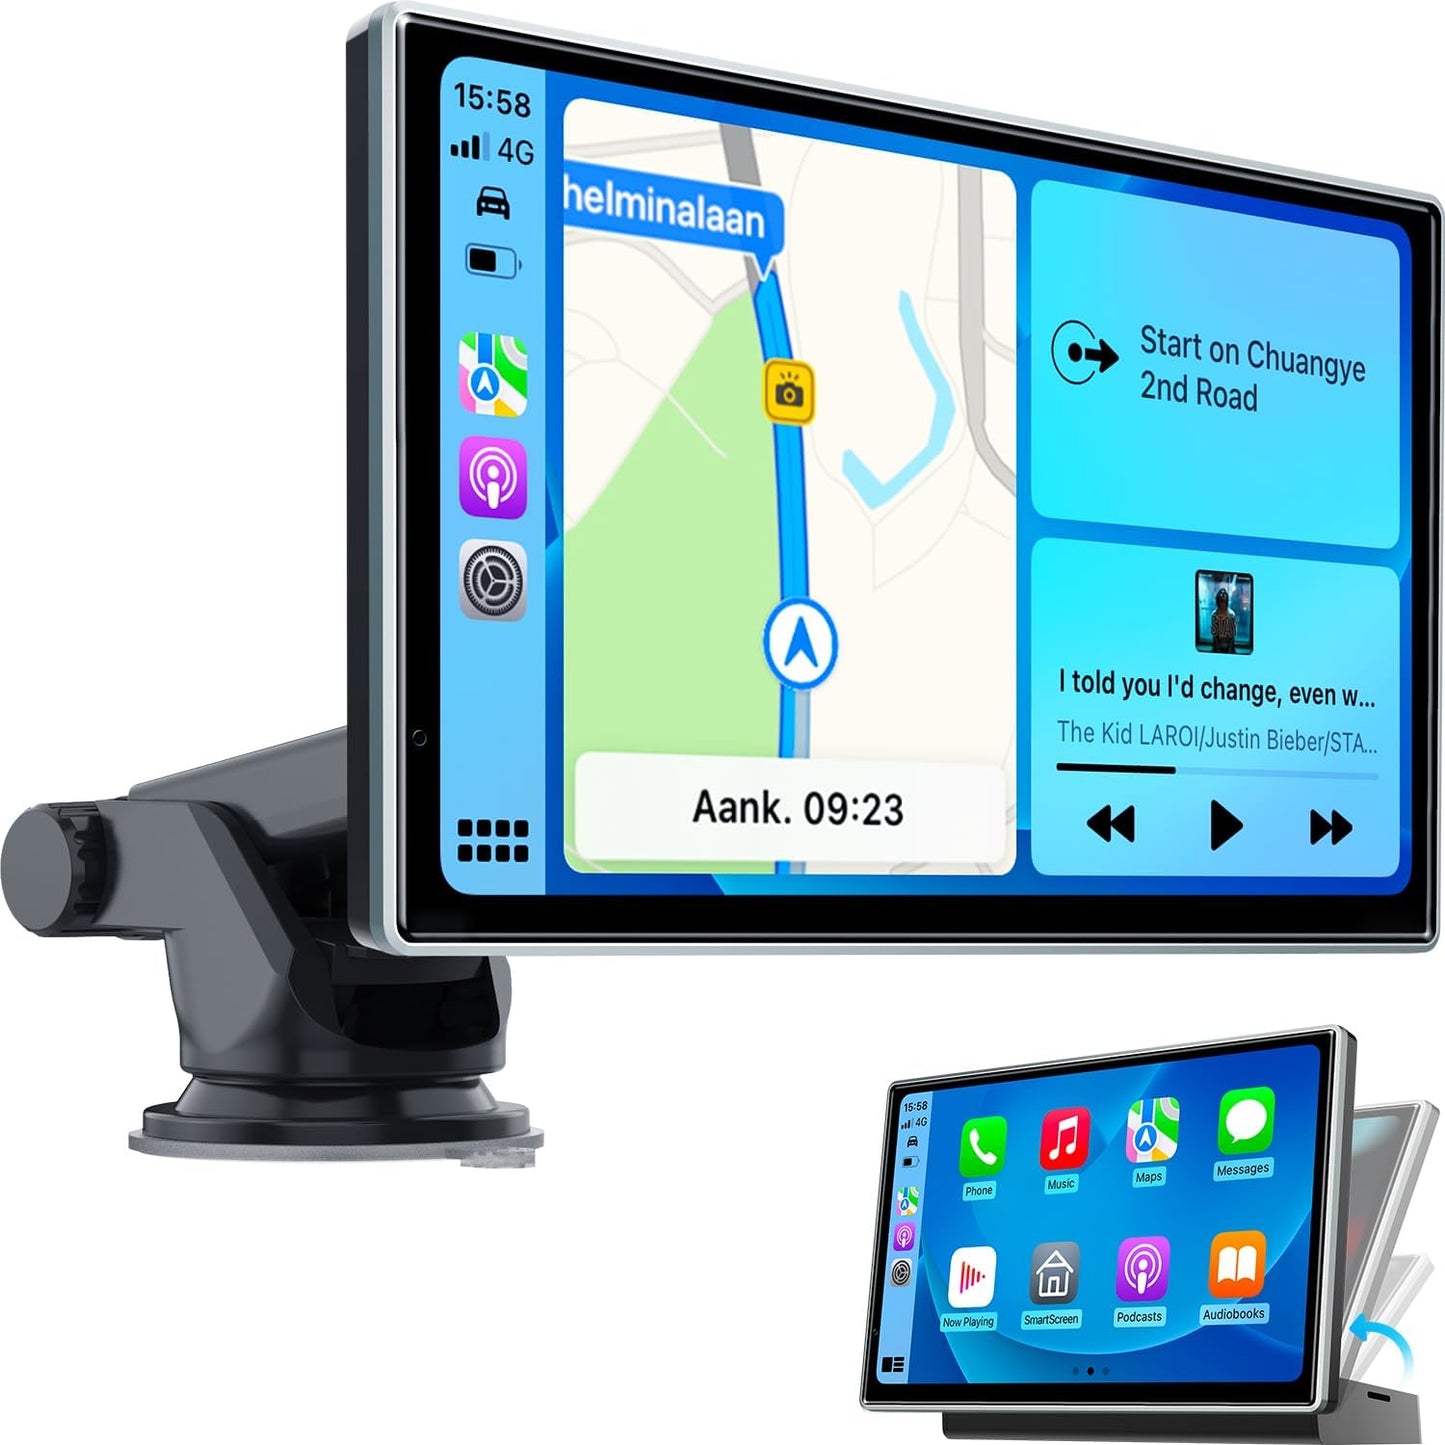 [Upgrade] Westods Wireless Apple Carplay & Android Auto, 7" Portable HD IPS Screen, GPS Navigation, Bluetooth Audio, AirPlay, MirrorCast, AUX/FM Transmitter for Most Car Dash or Windshield Mounted